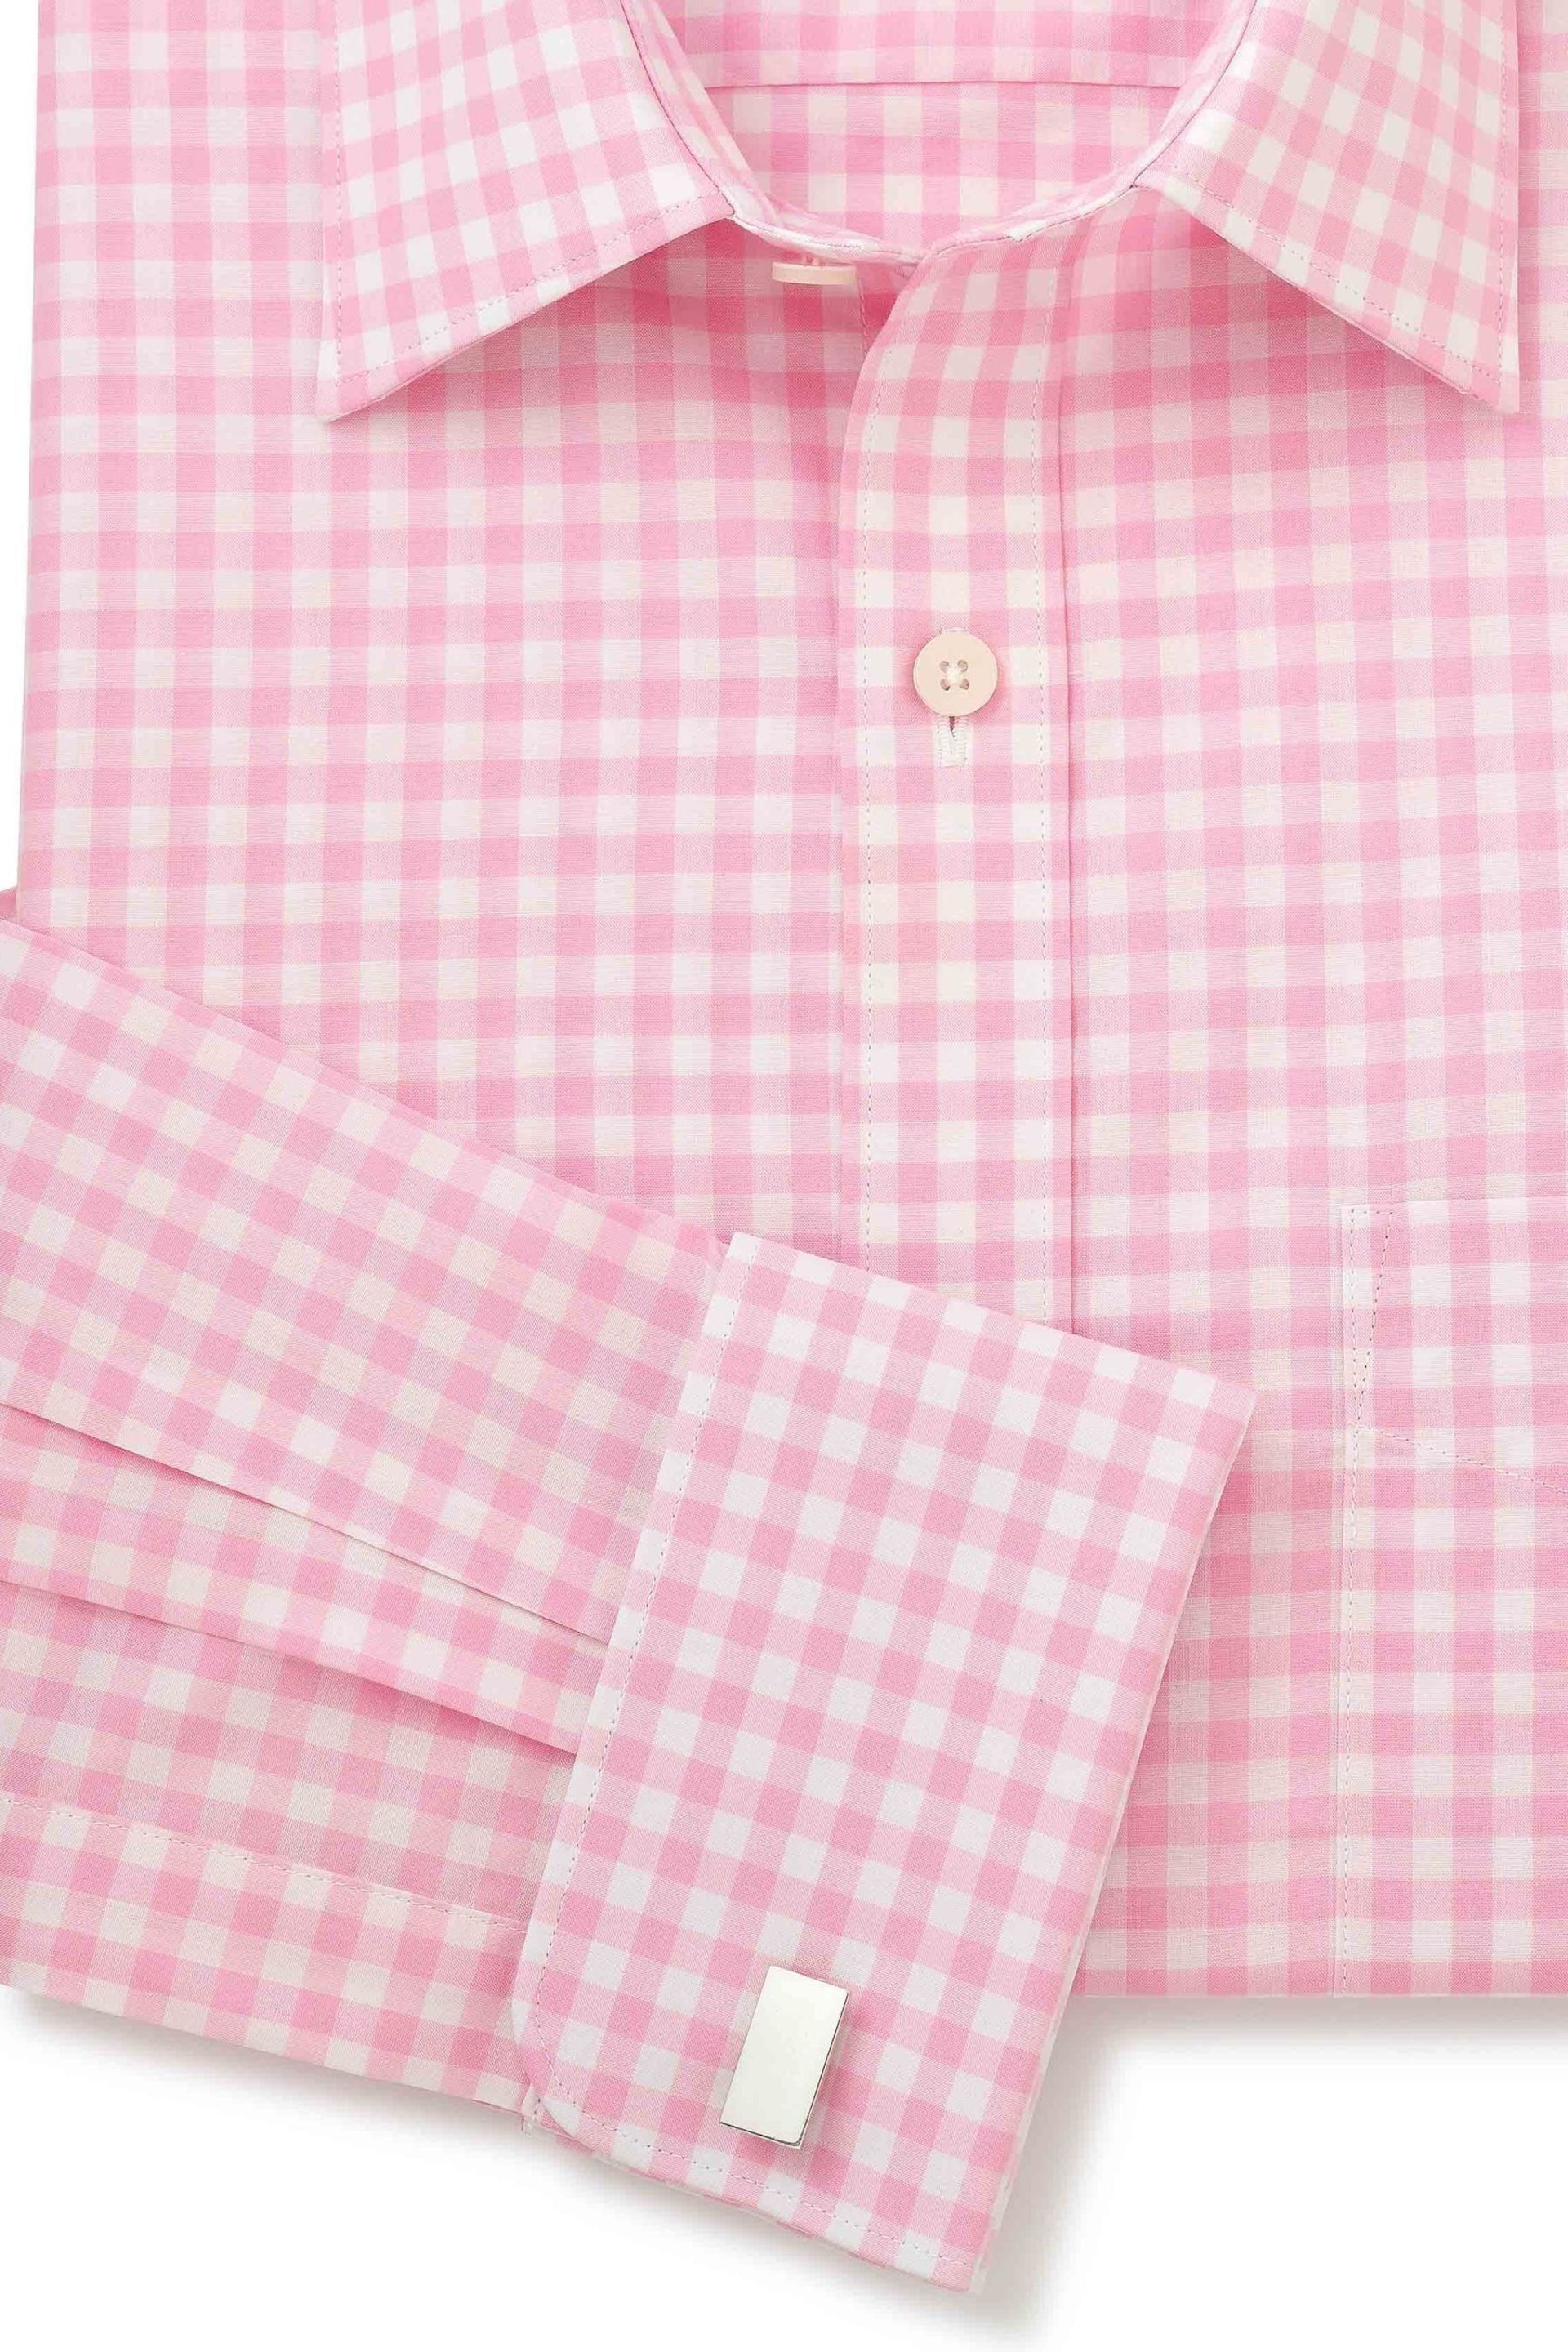 The Savile Row Company Classic Fit Pink Savile Row Check Double Cuff Shirt - Image 6 of 6